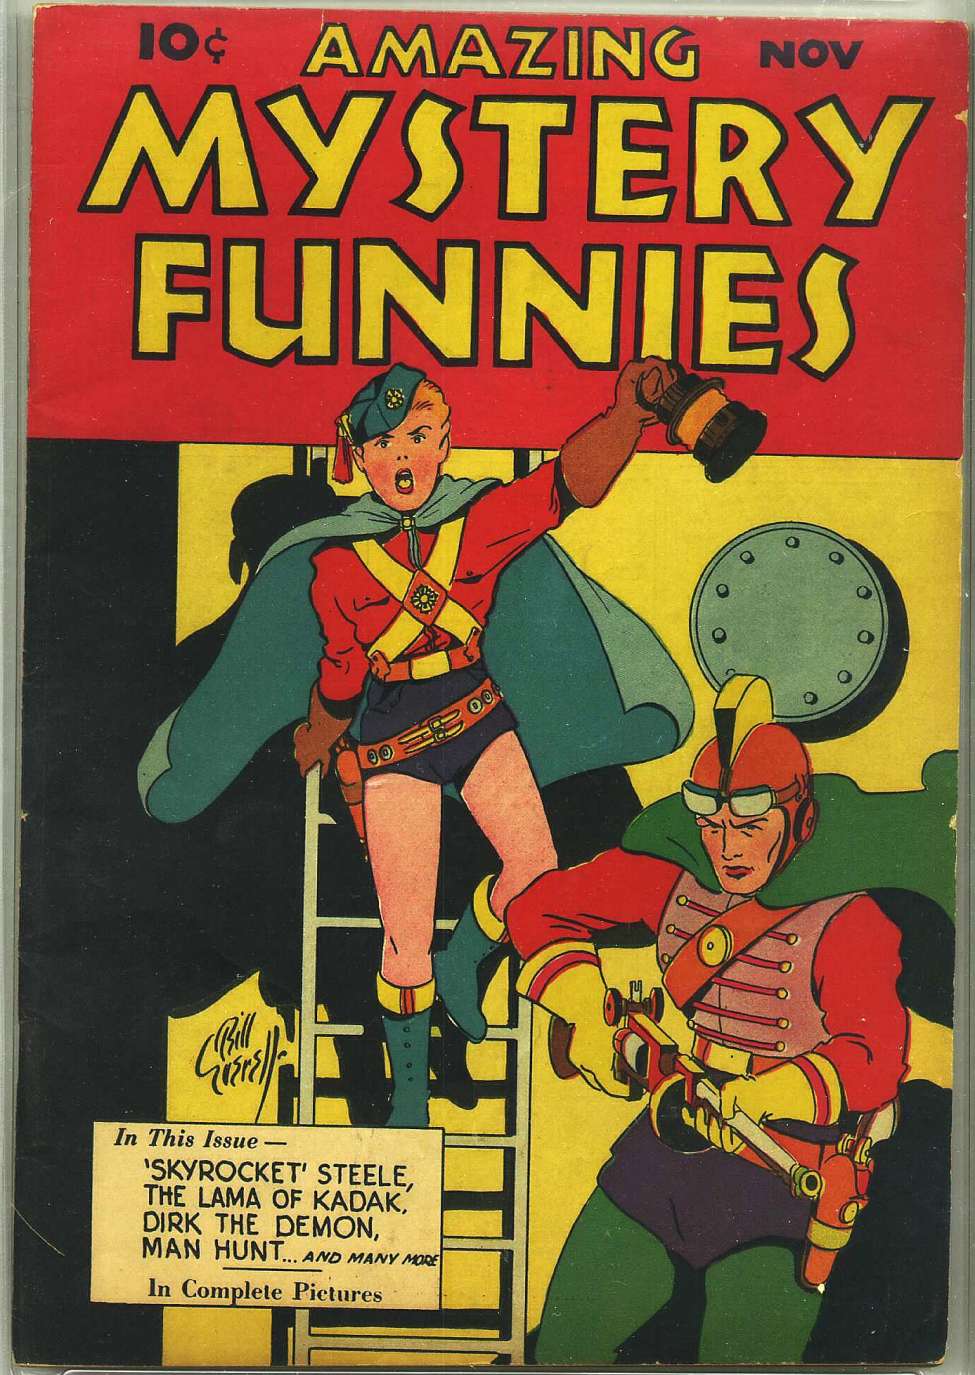 Book Cover For Amazing Mystery Funnies 3 (v1 3)